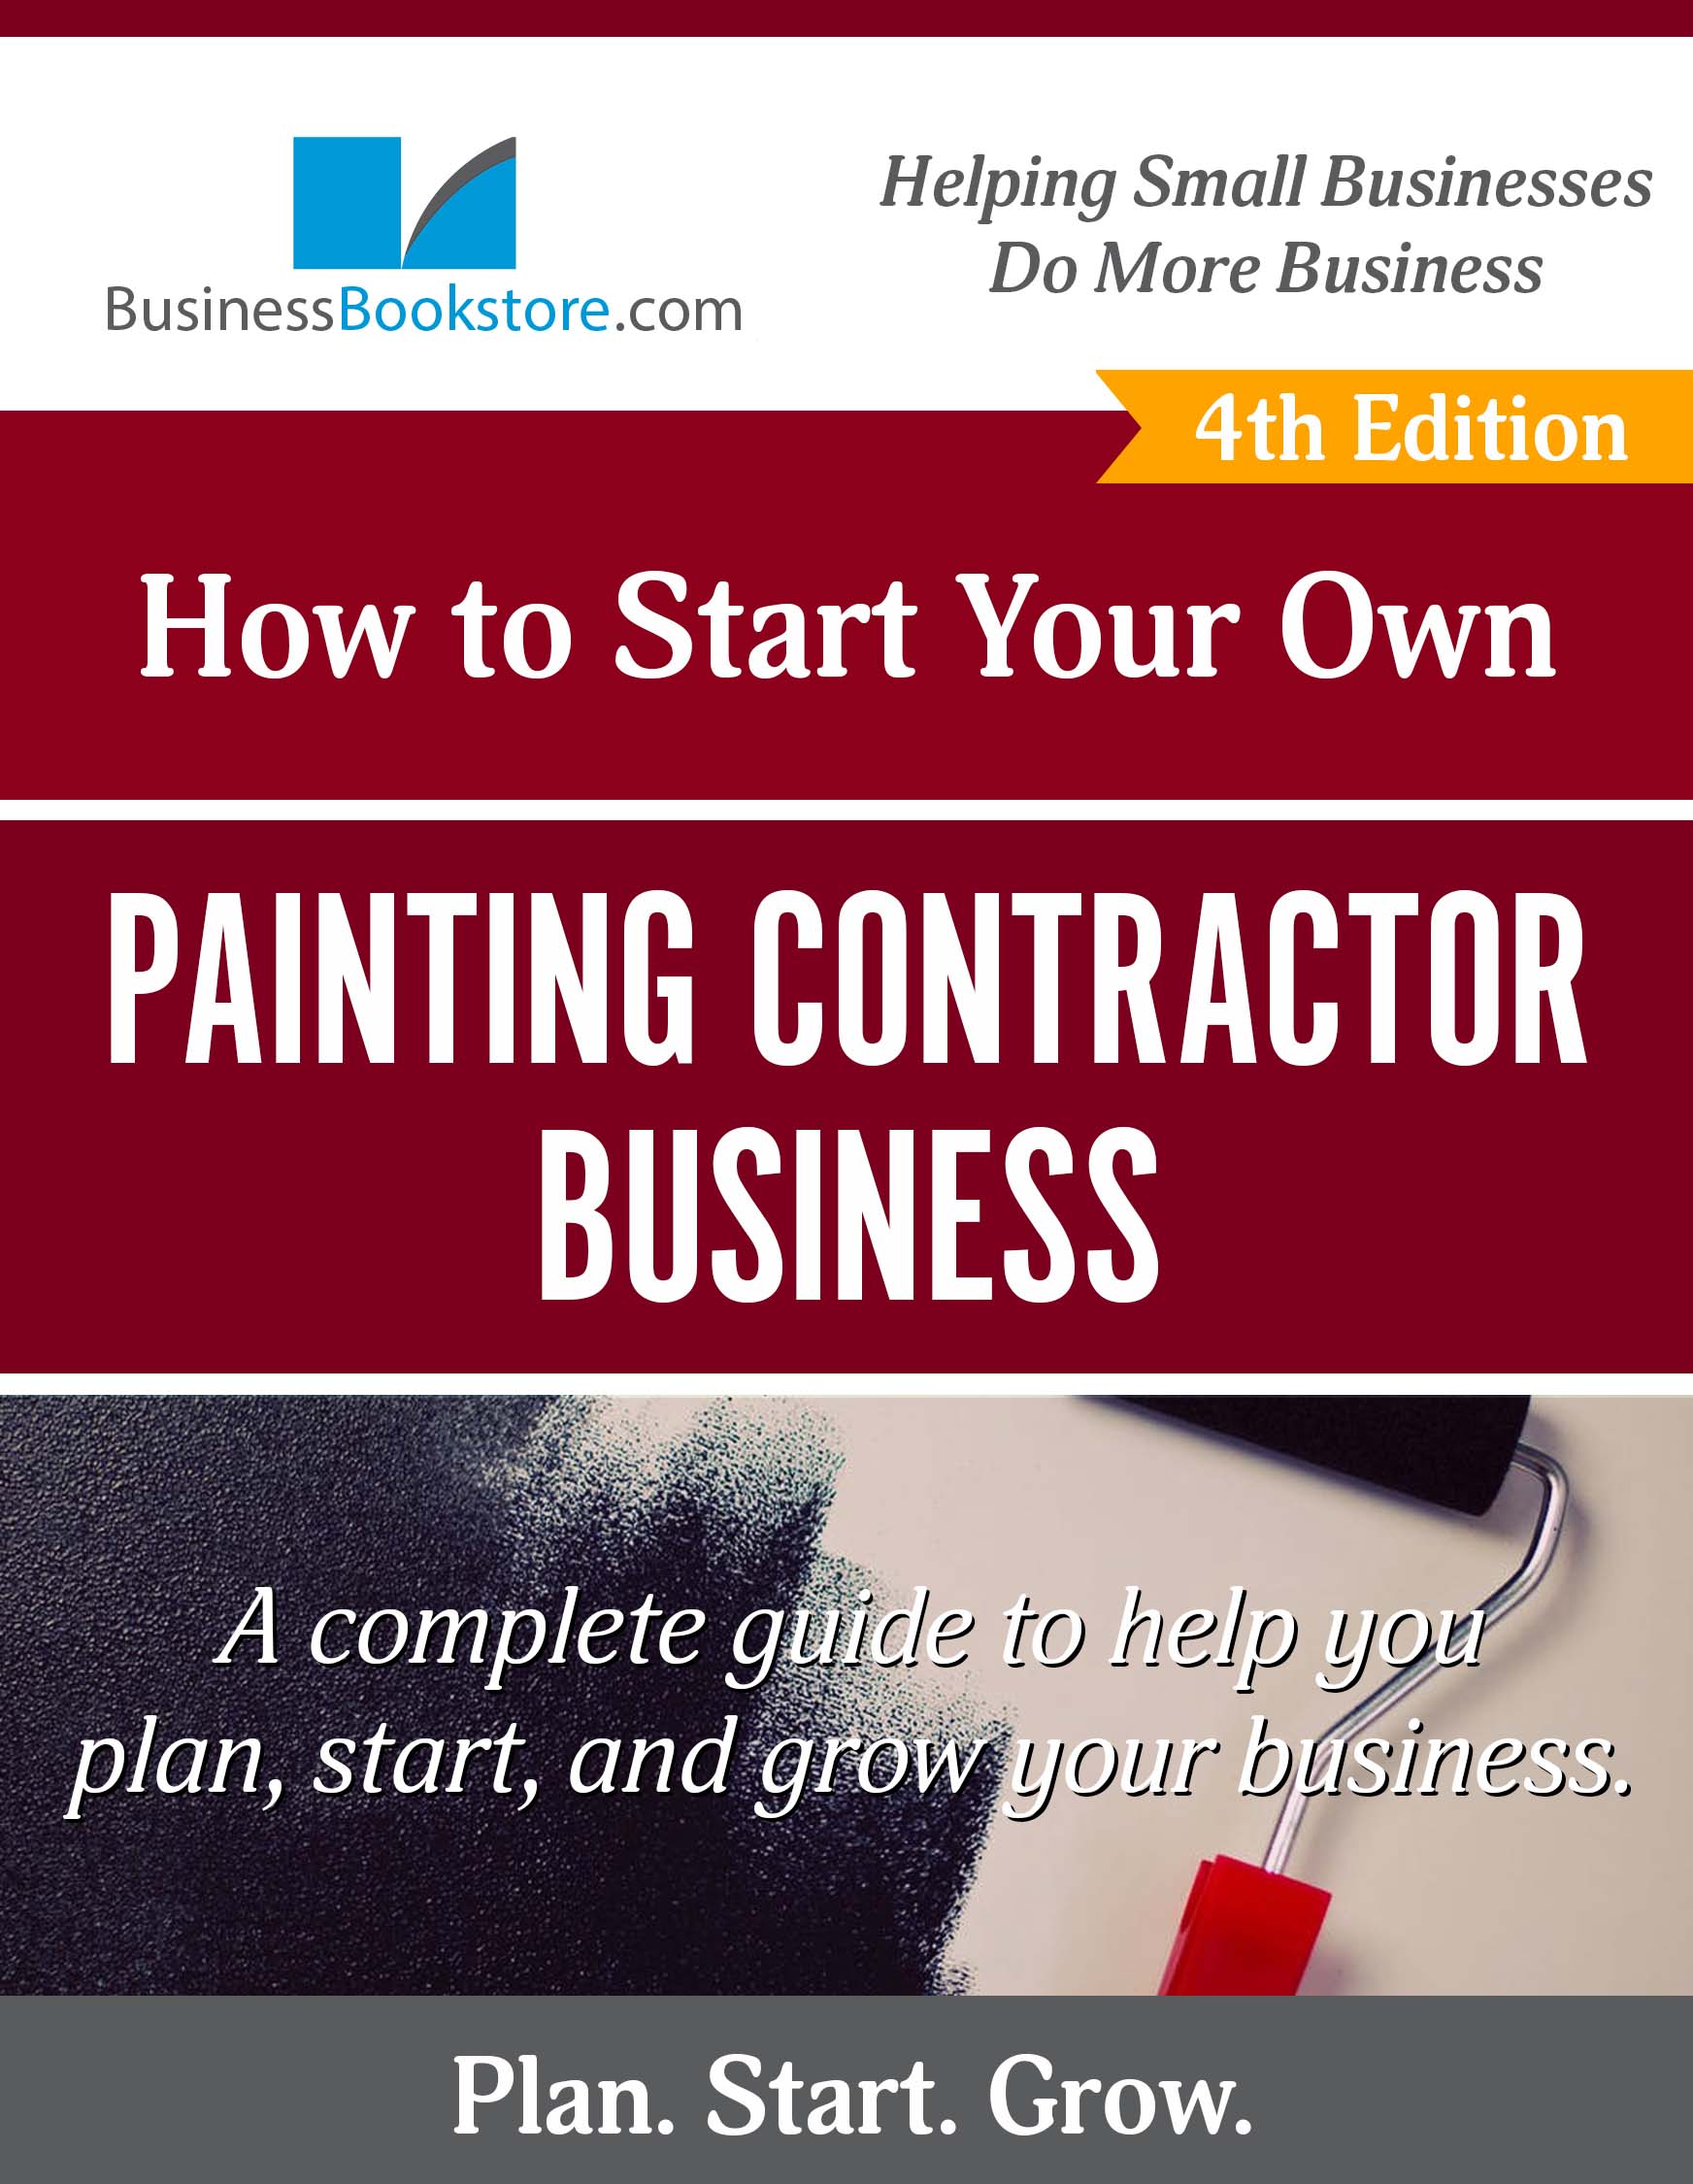 How to Start a Painting Contractor Business